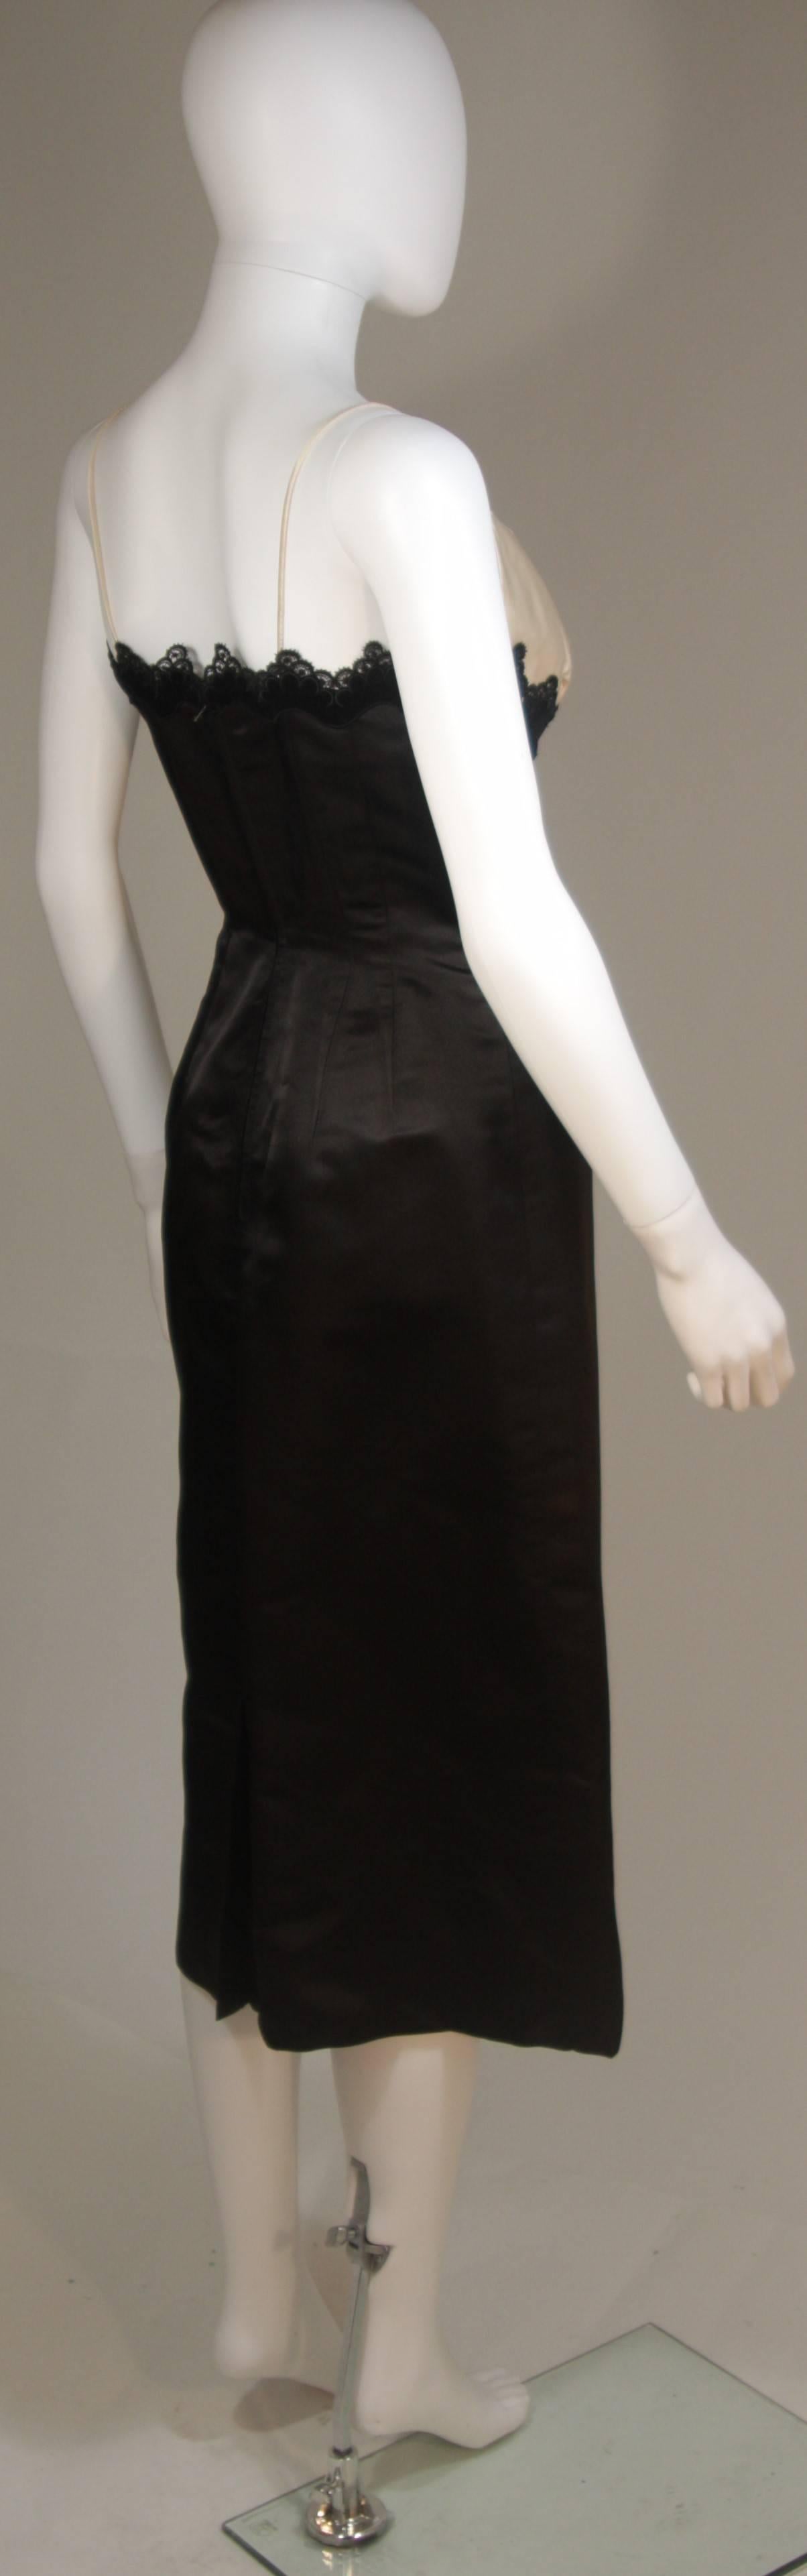 OLEG CASSINI Black and White Contrast Cocktail Dress with Lace Size 2-4 For Sale 3